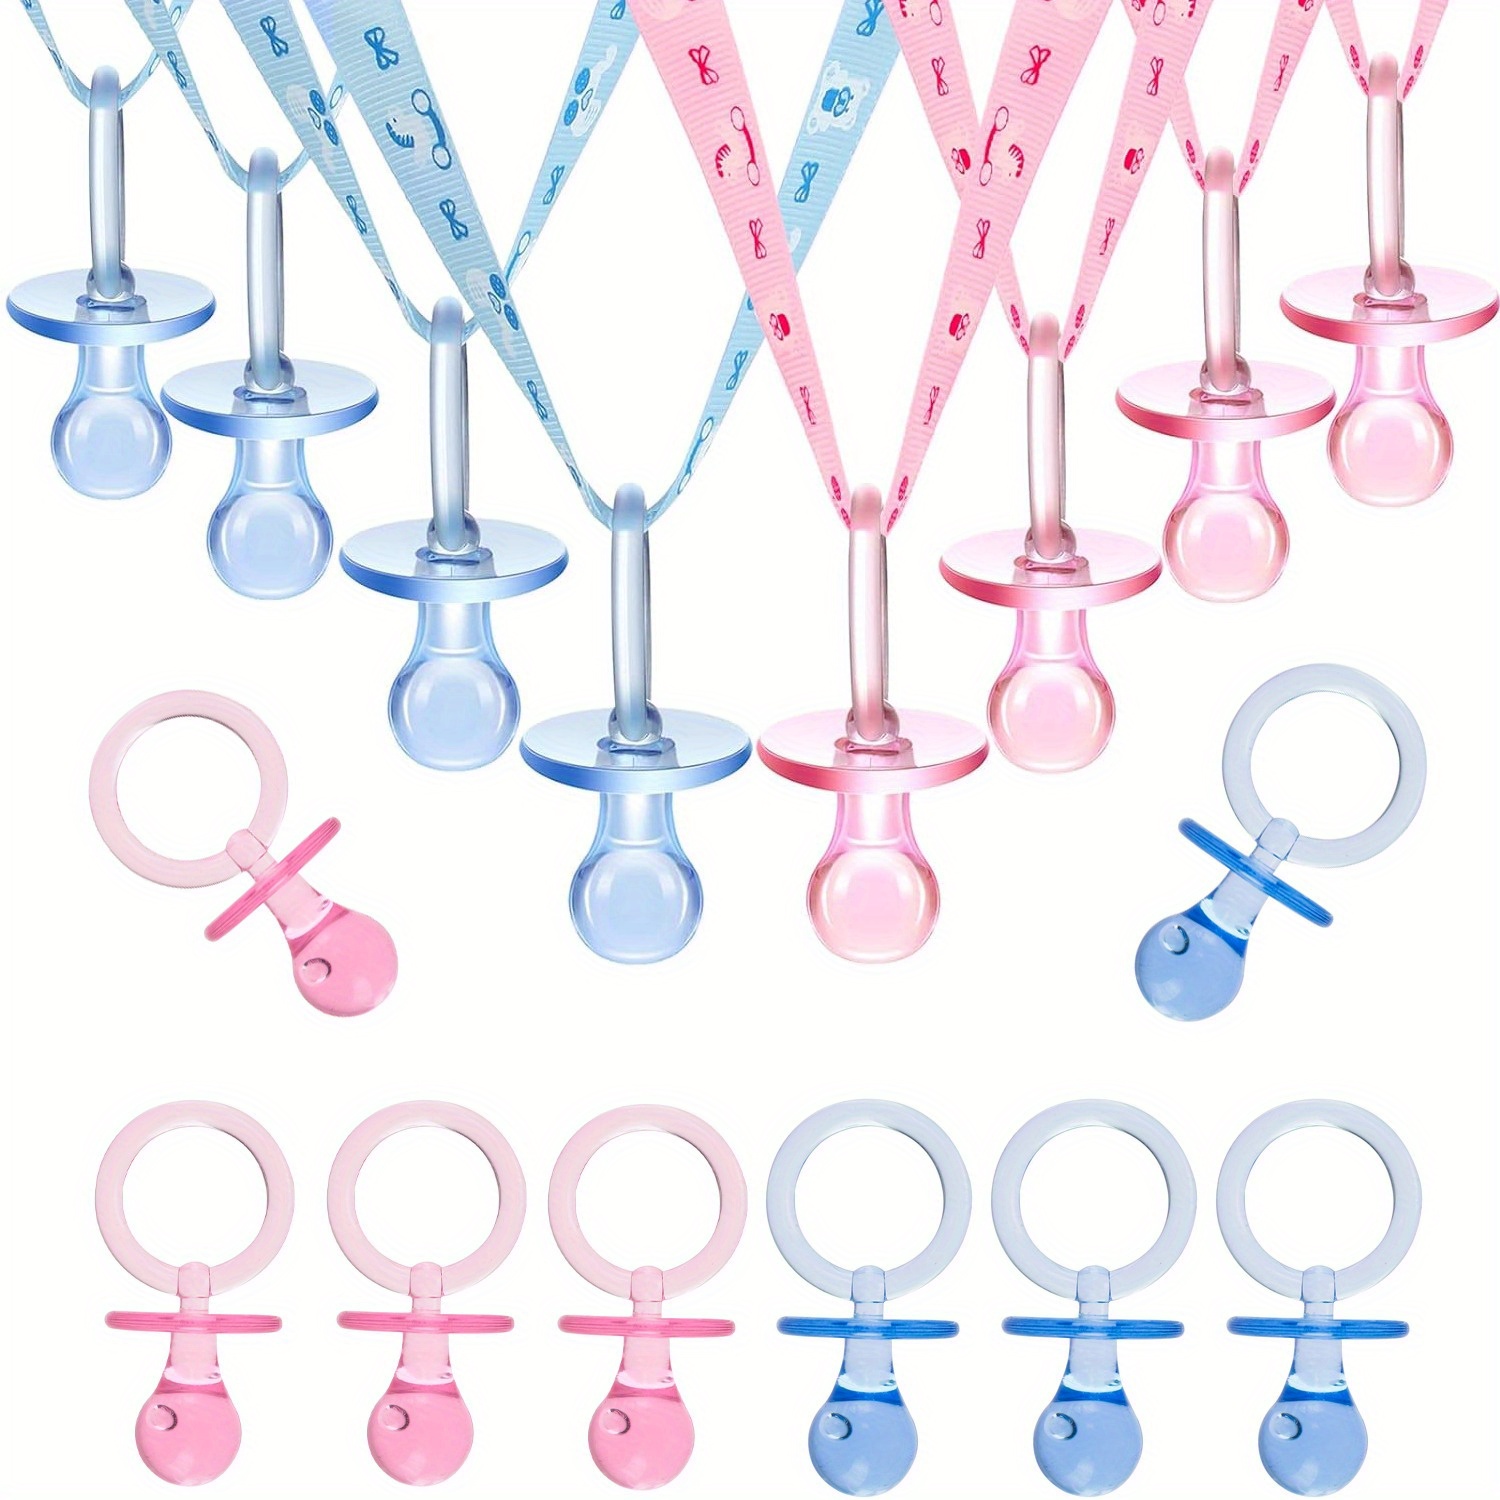 

Cute Shower Party Favors, Table Scatter Decorations, Party Charms For Gender Reveal & Celebrations